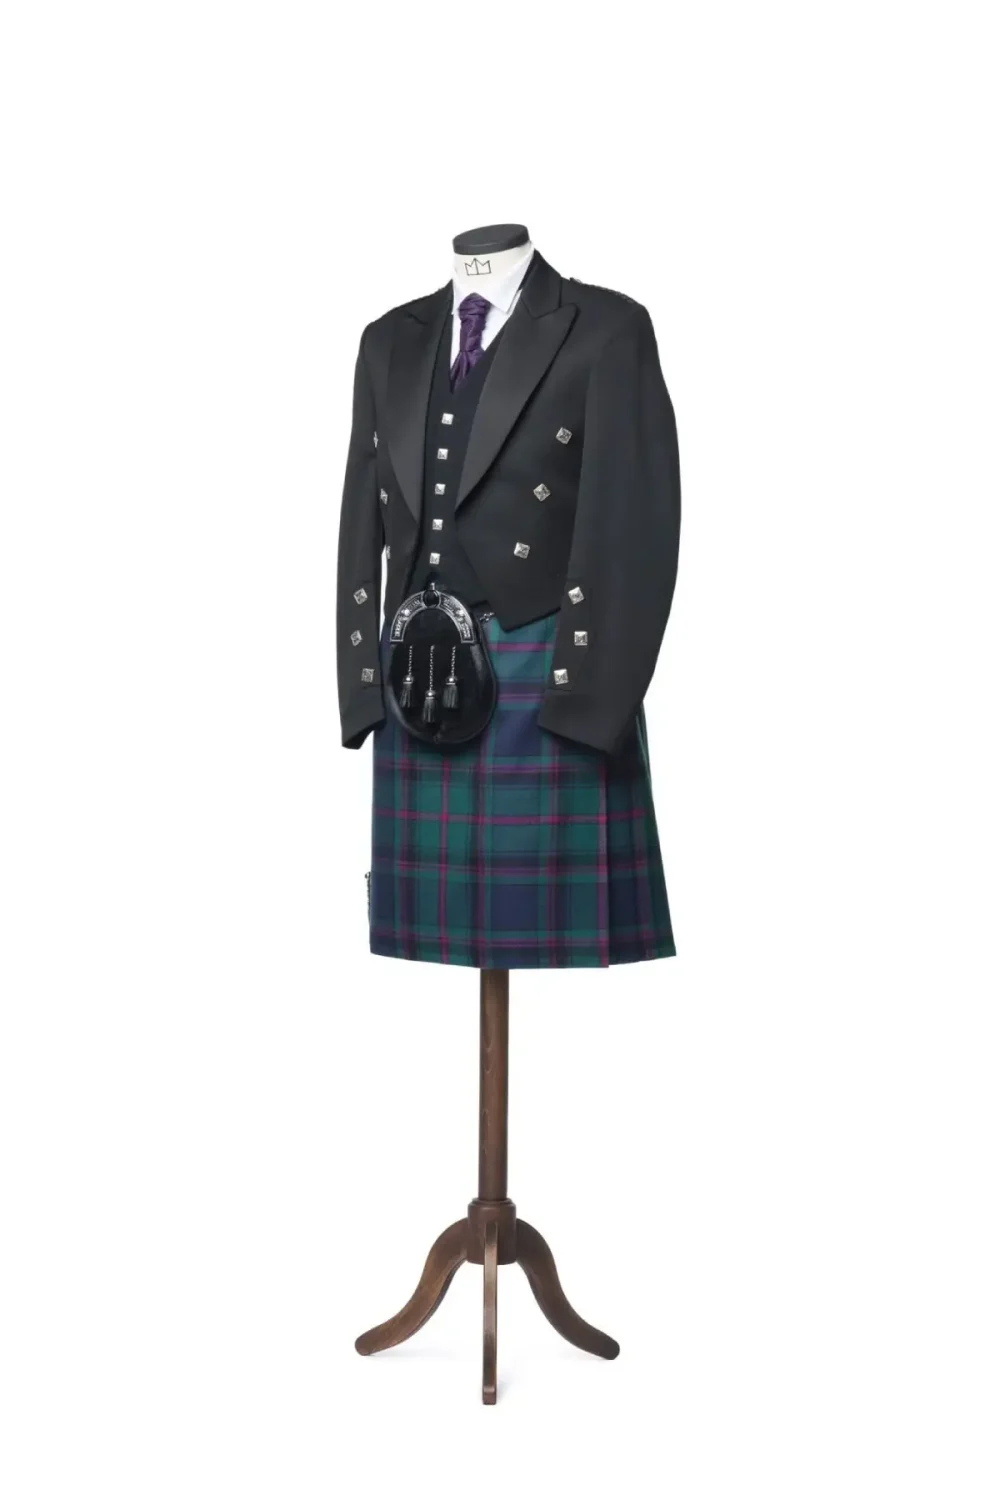 A tilted picture of Prince Charlie Kilt Outfit with 5 button Vest.